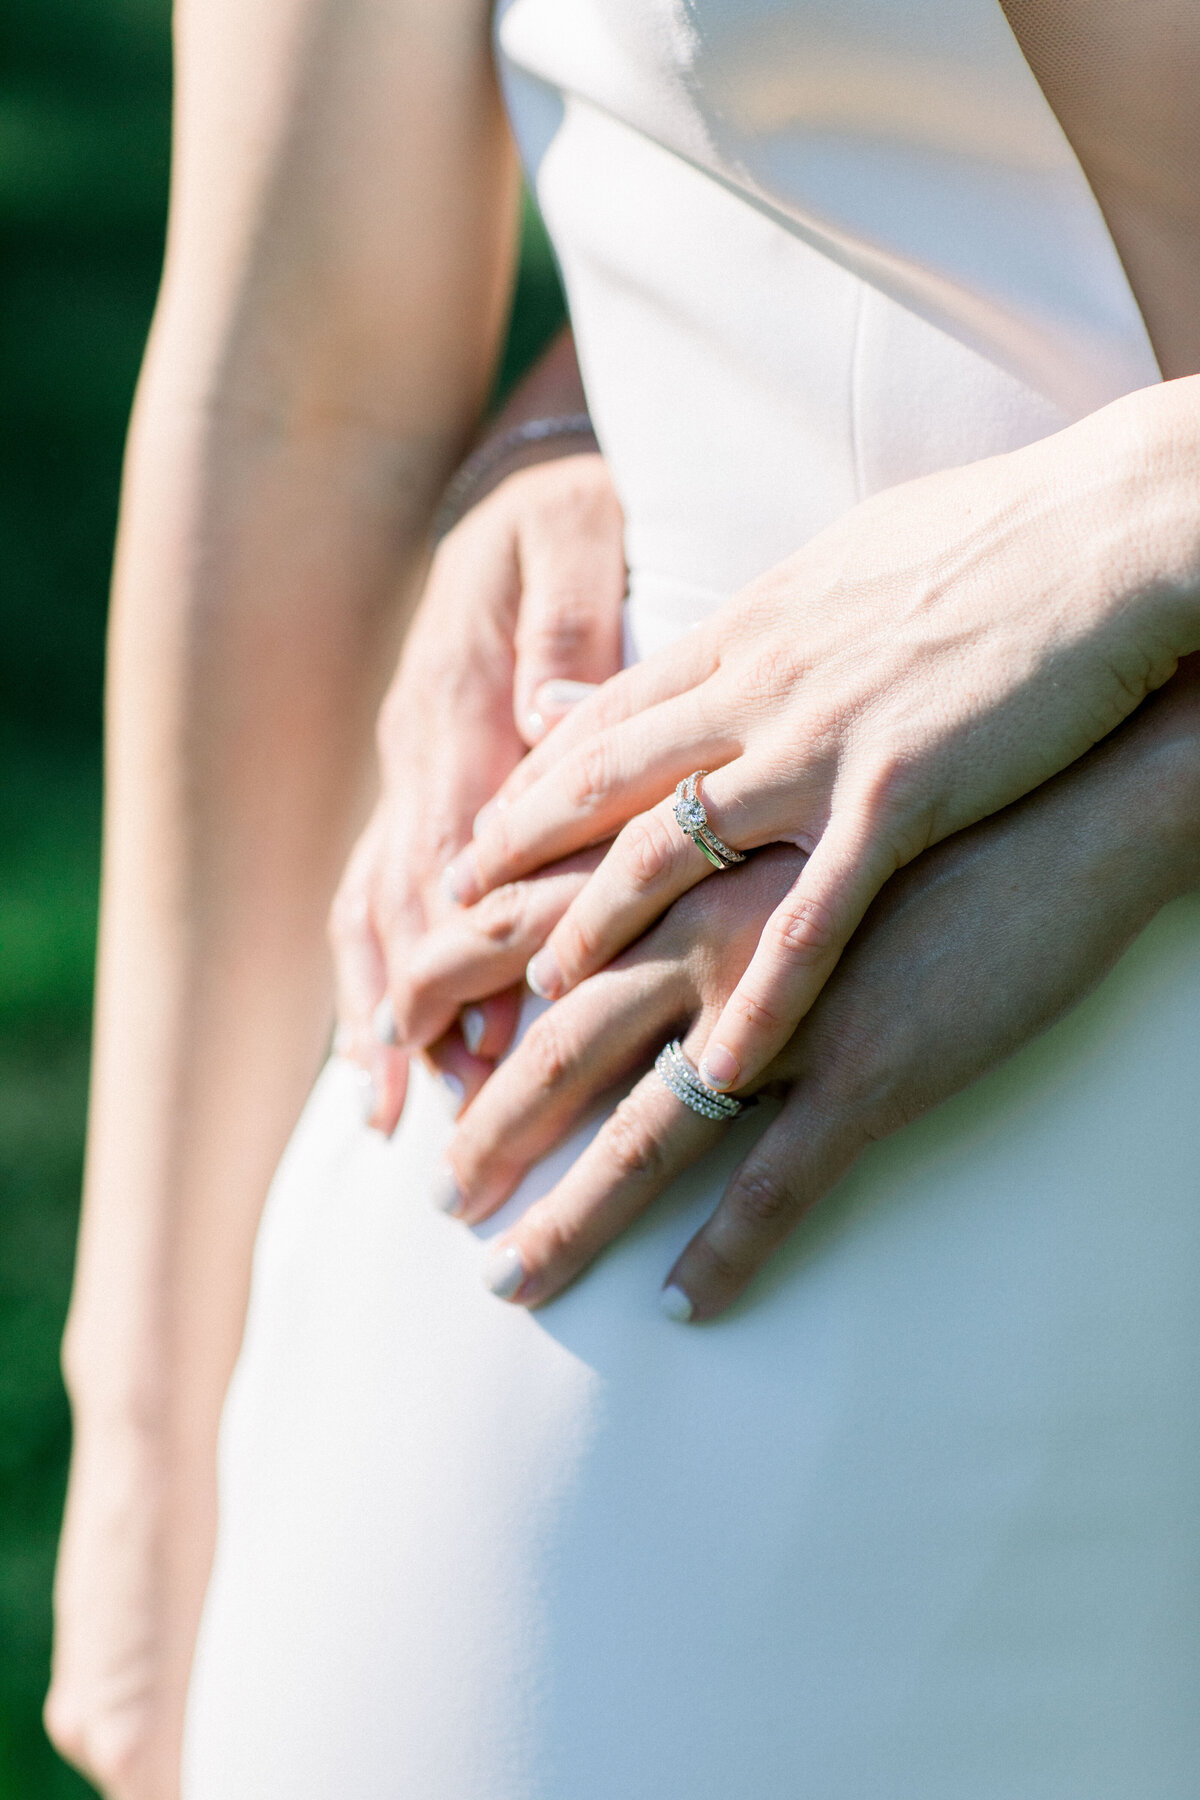 hands with wedding rings on white dress